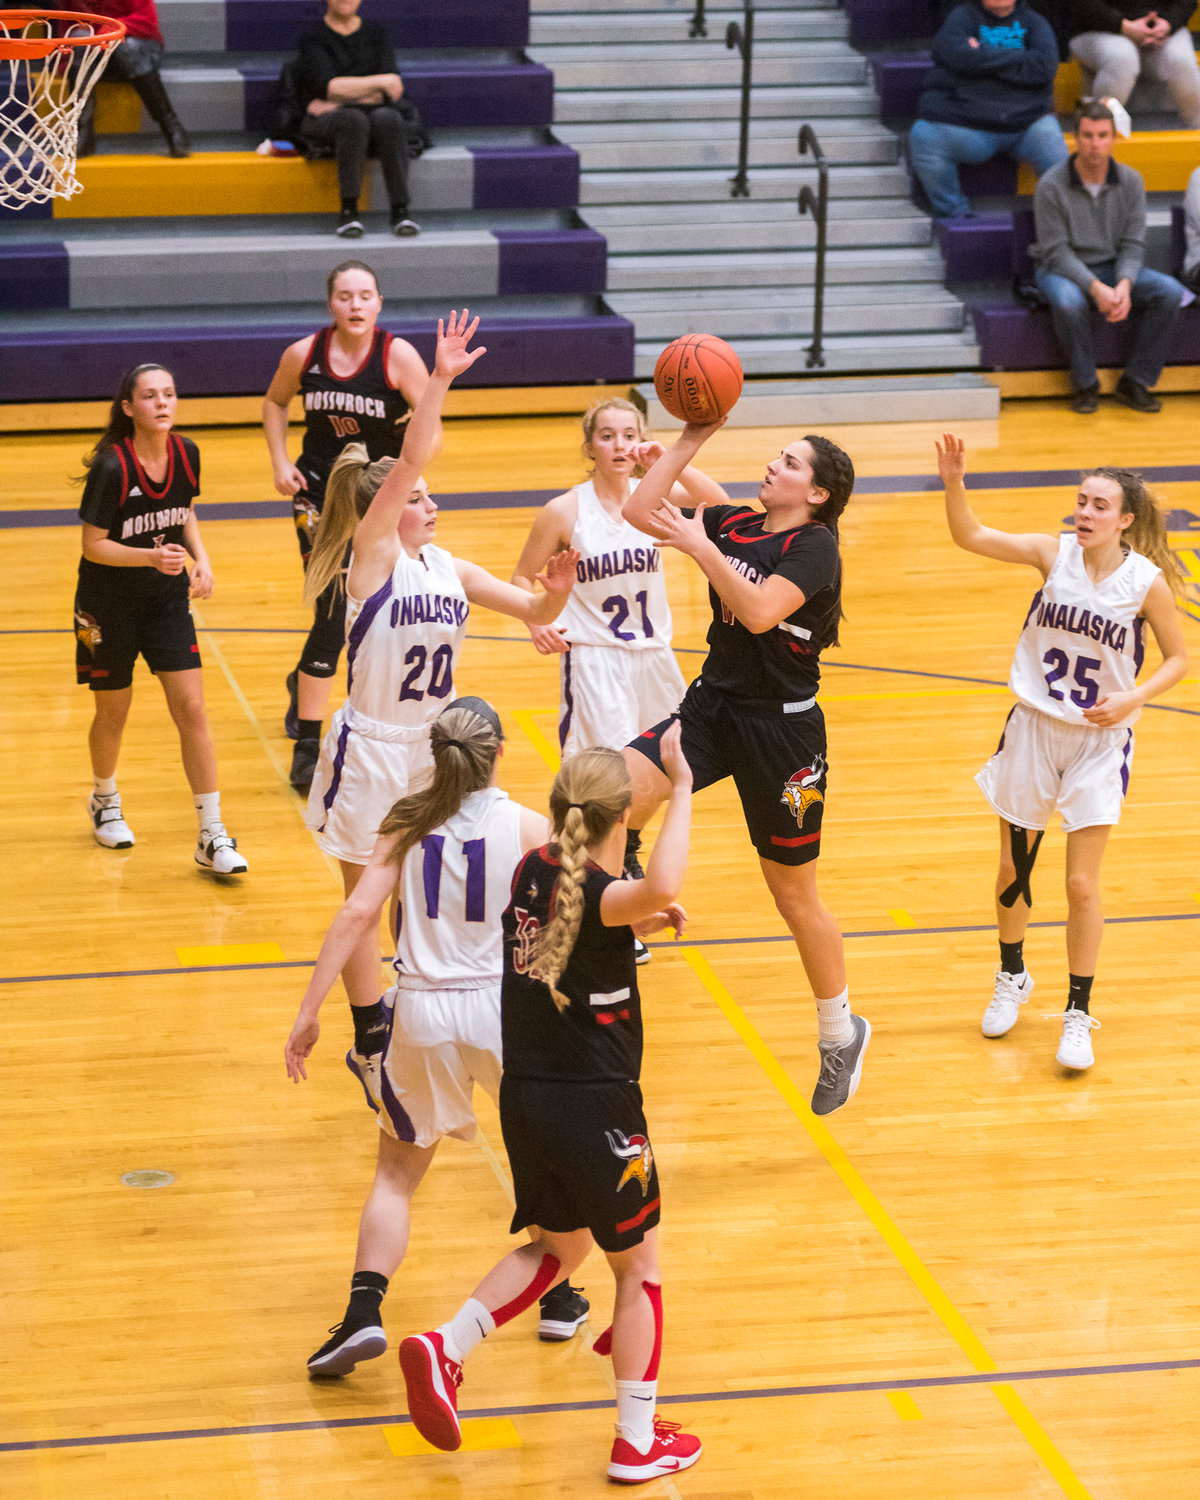 Viking's Andee Nelson (11) attempts a layup during a Central 2B girls basketball game Thursday night in Onalaska.